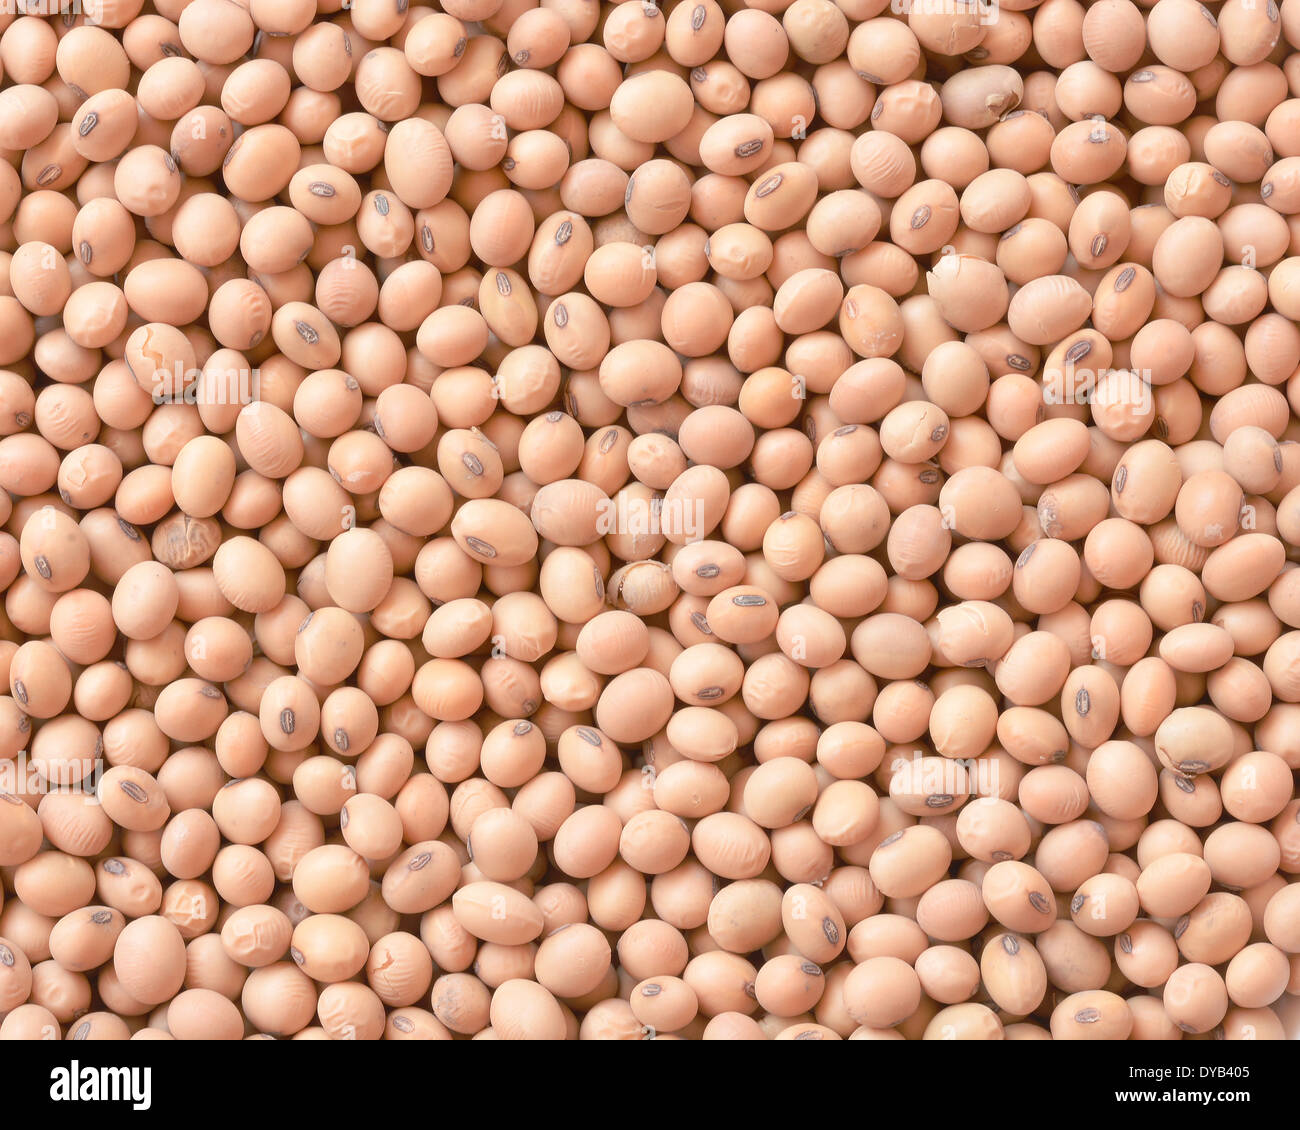 soy bean background Stock Photo